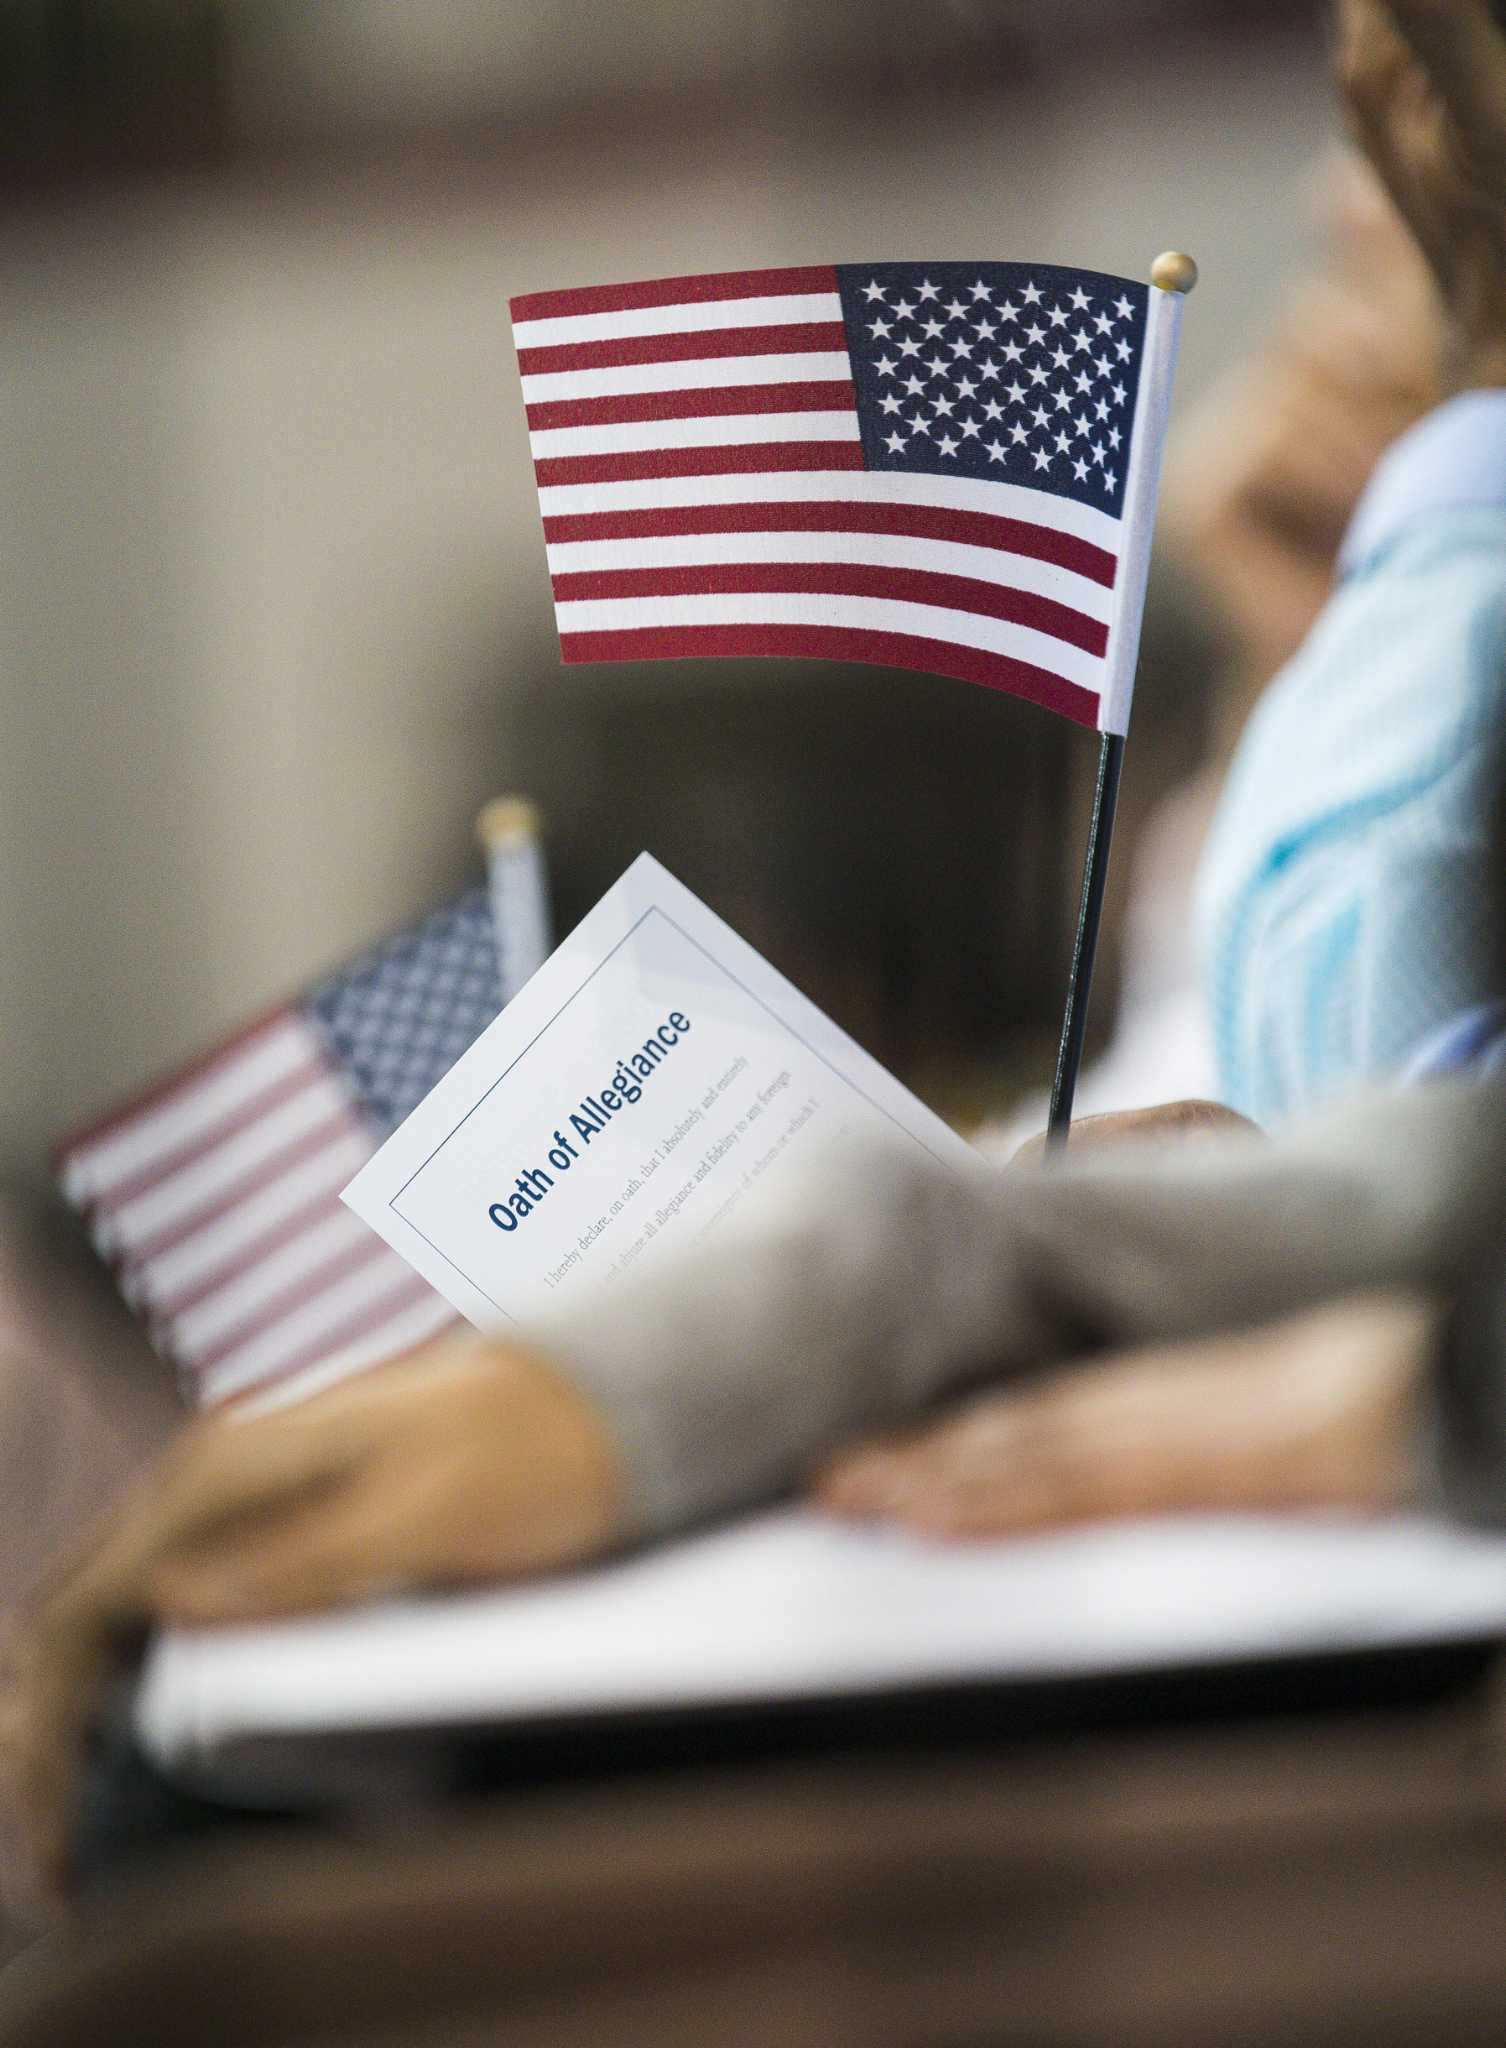 Immigrants applying for citizenship in Houston face high wait times